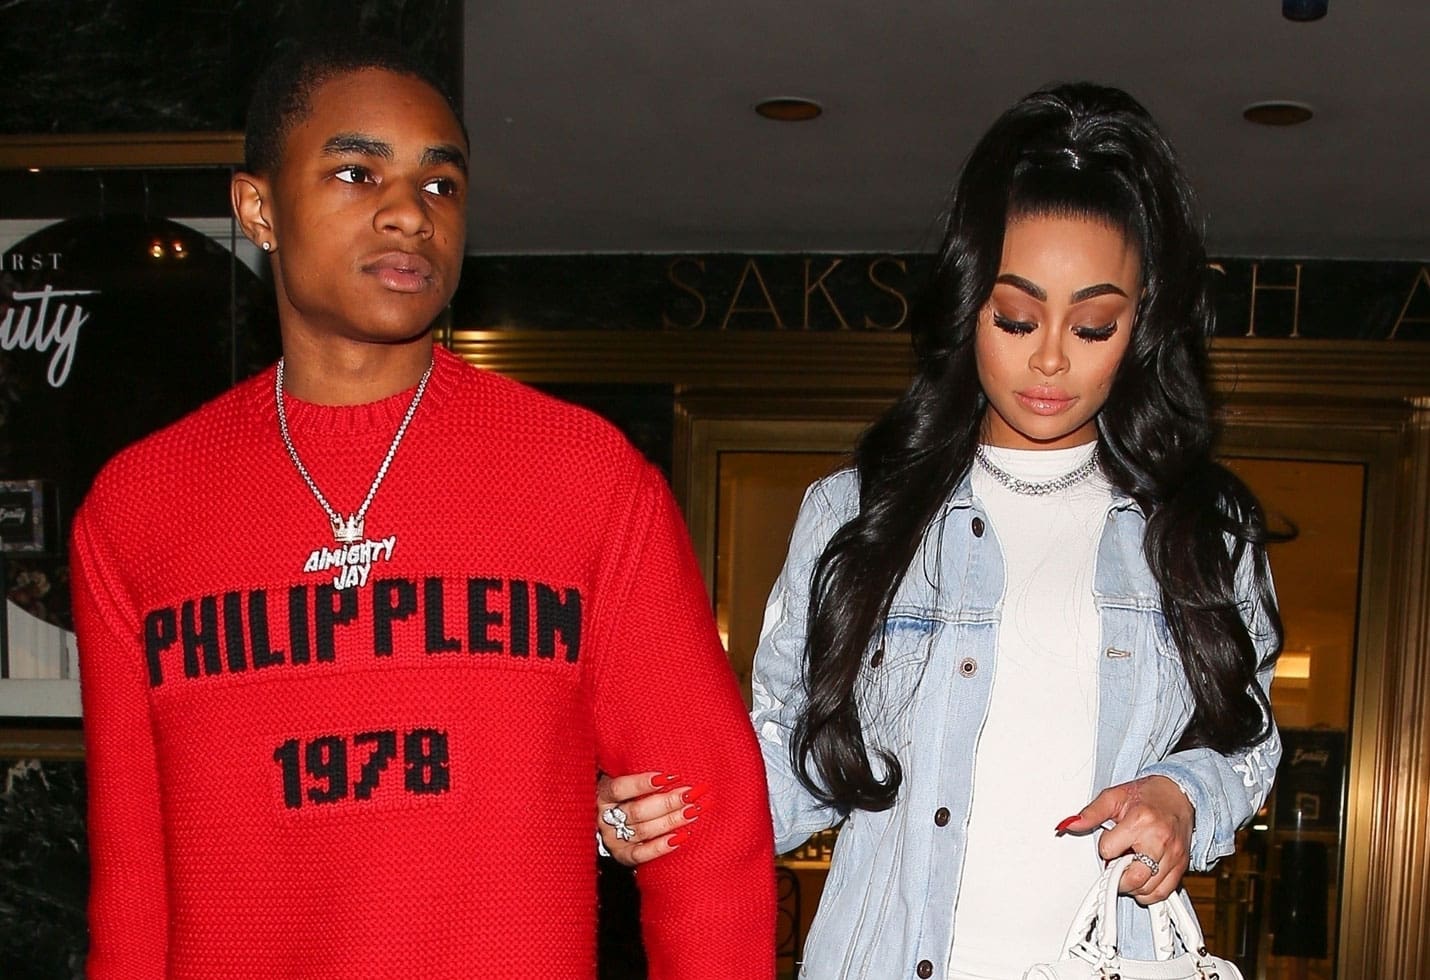 Blac Chyna And YBN Almighty Jay Reunite At The Club - See The Video